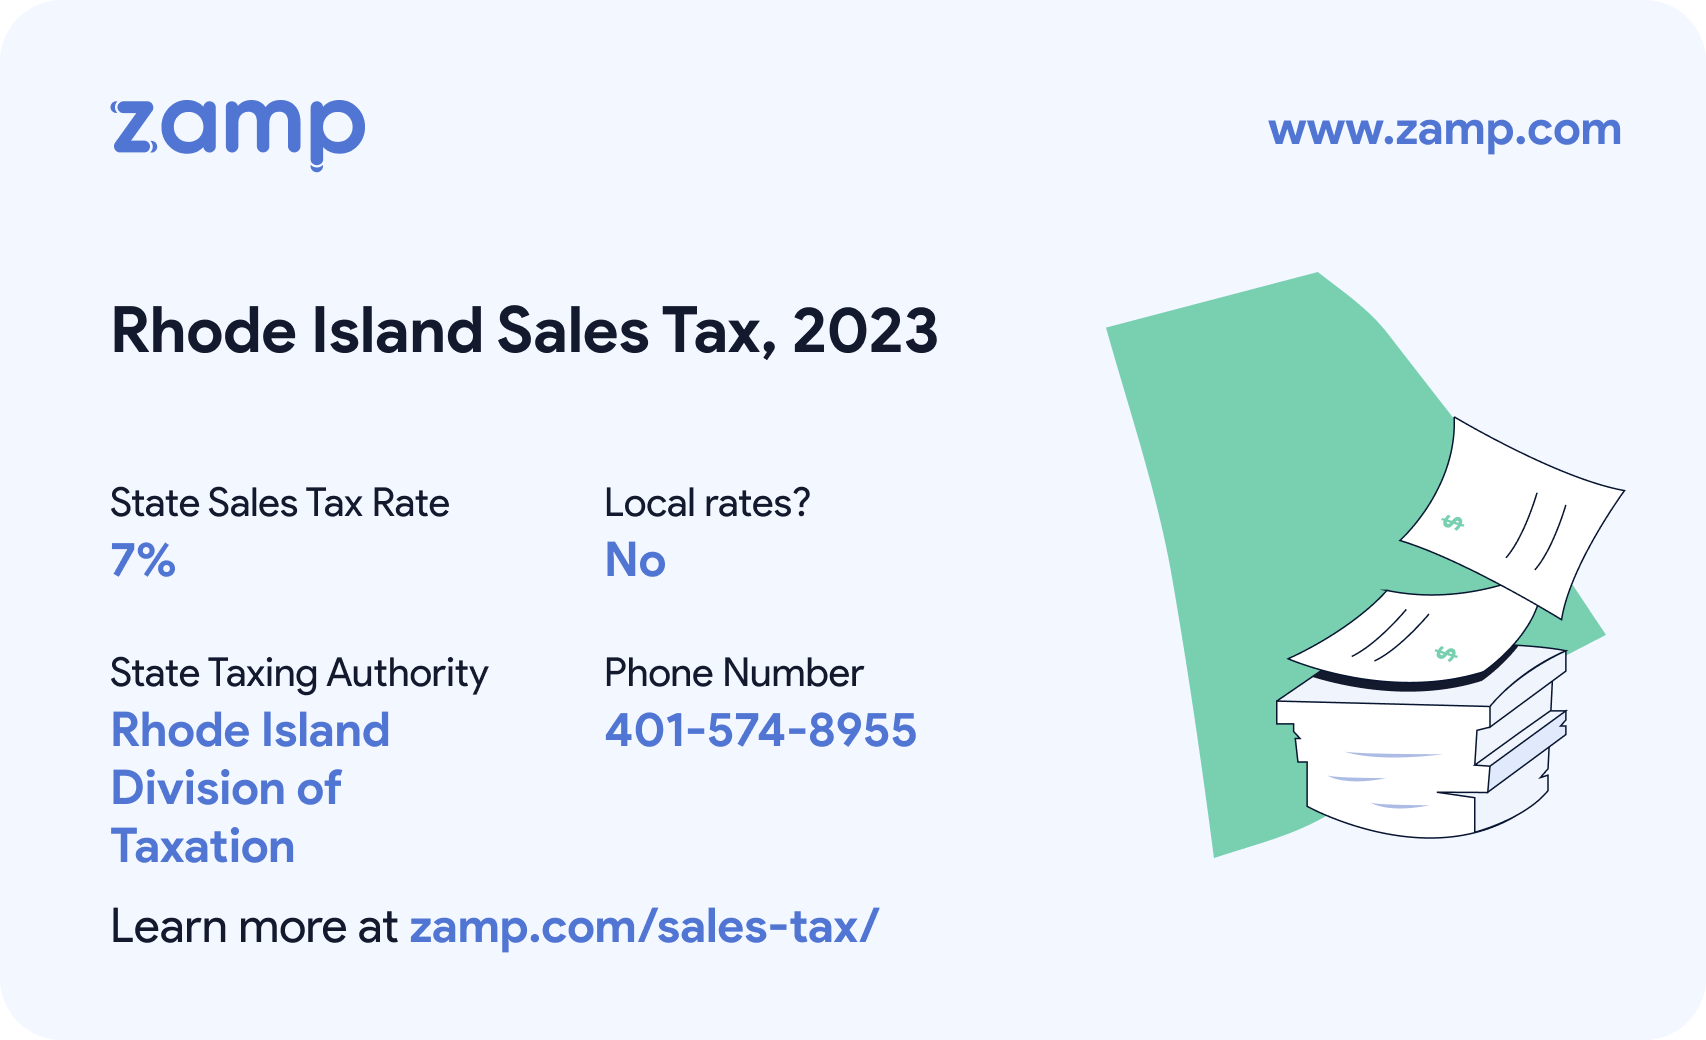 Rhode Island basic sales tax info for 2023 - State sales tax rate: 7%, Local rates? No; State Taxing Authority: Rhode Island Division of Taxation; and phone number 401-574-8955